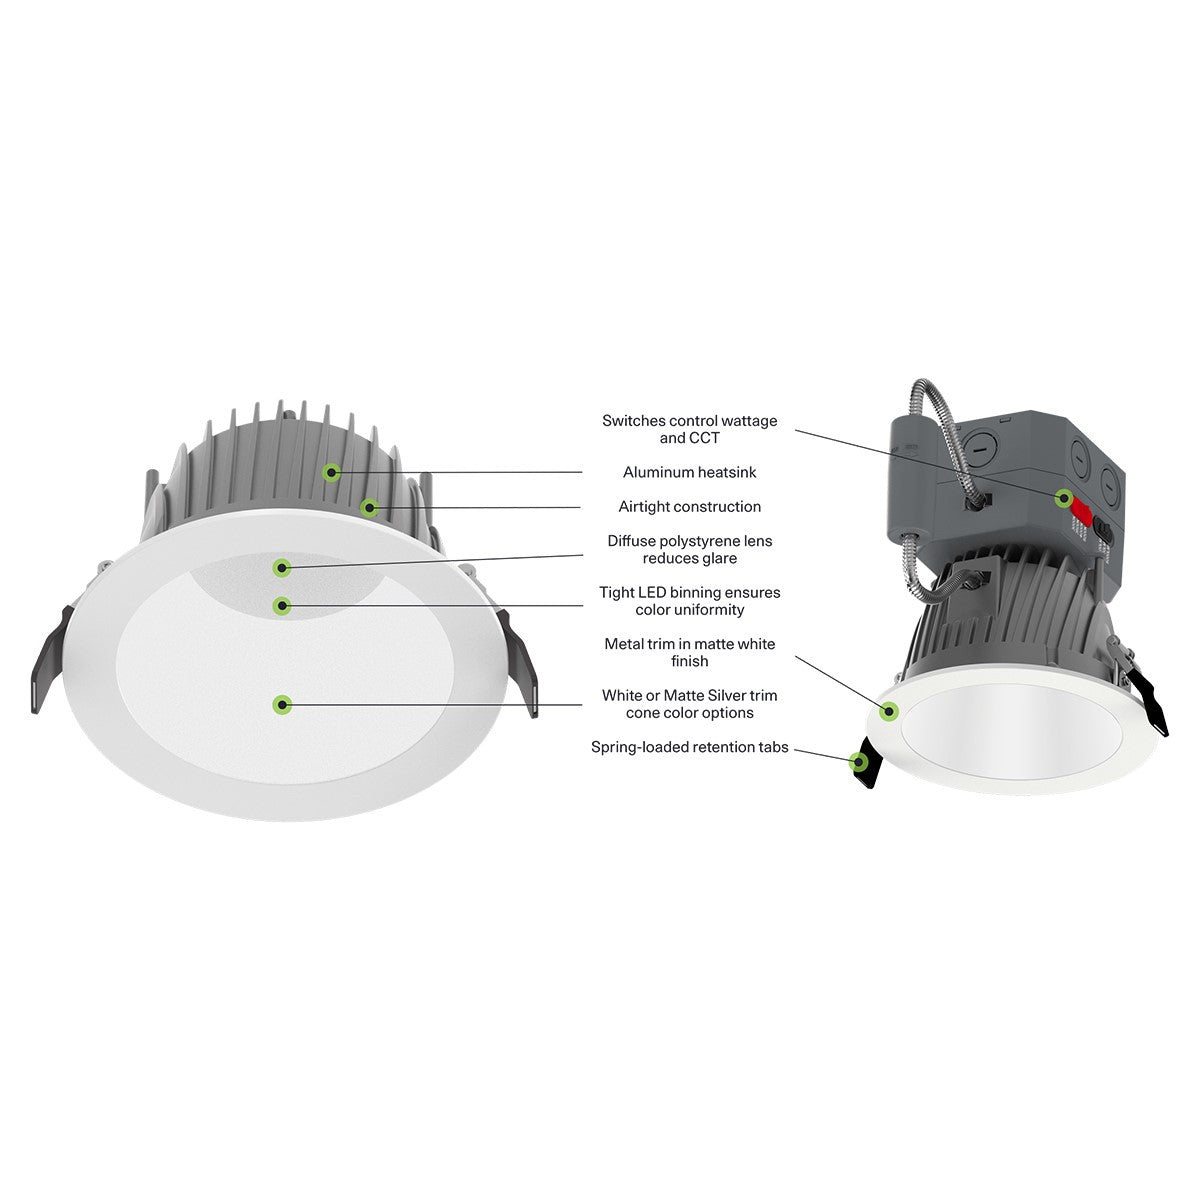 4 Inch LED Deep Regress Commercial Downlight, Field Adjustable 8/10/11W, 650/750/850 Lumens, 30/35/40/50K, Smooth Trim, White Finish